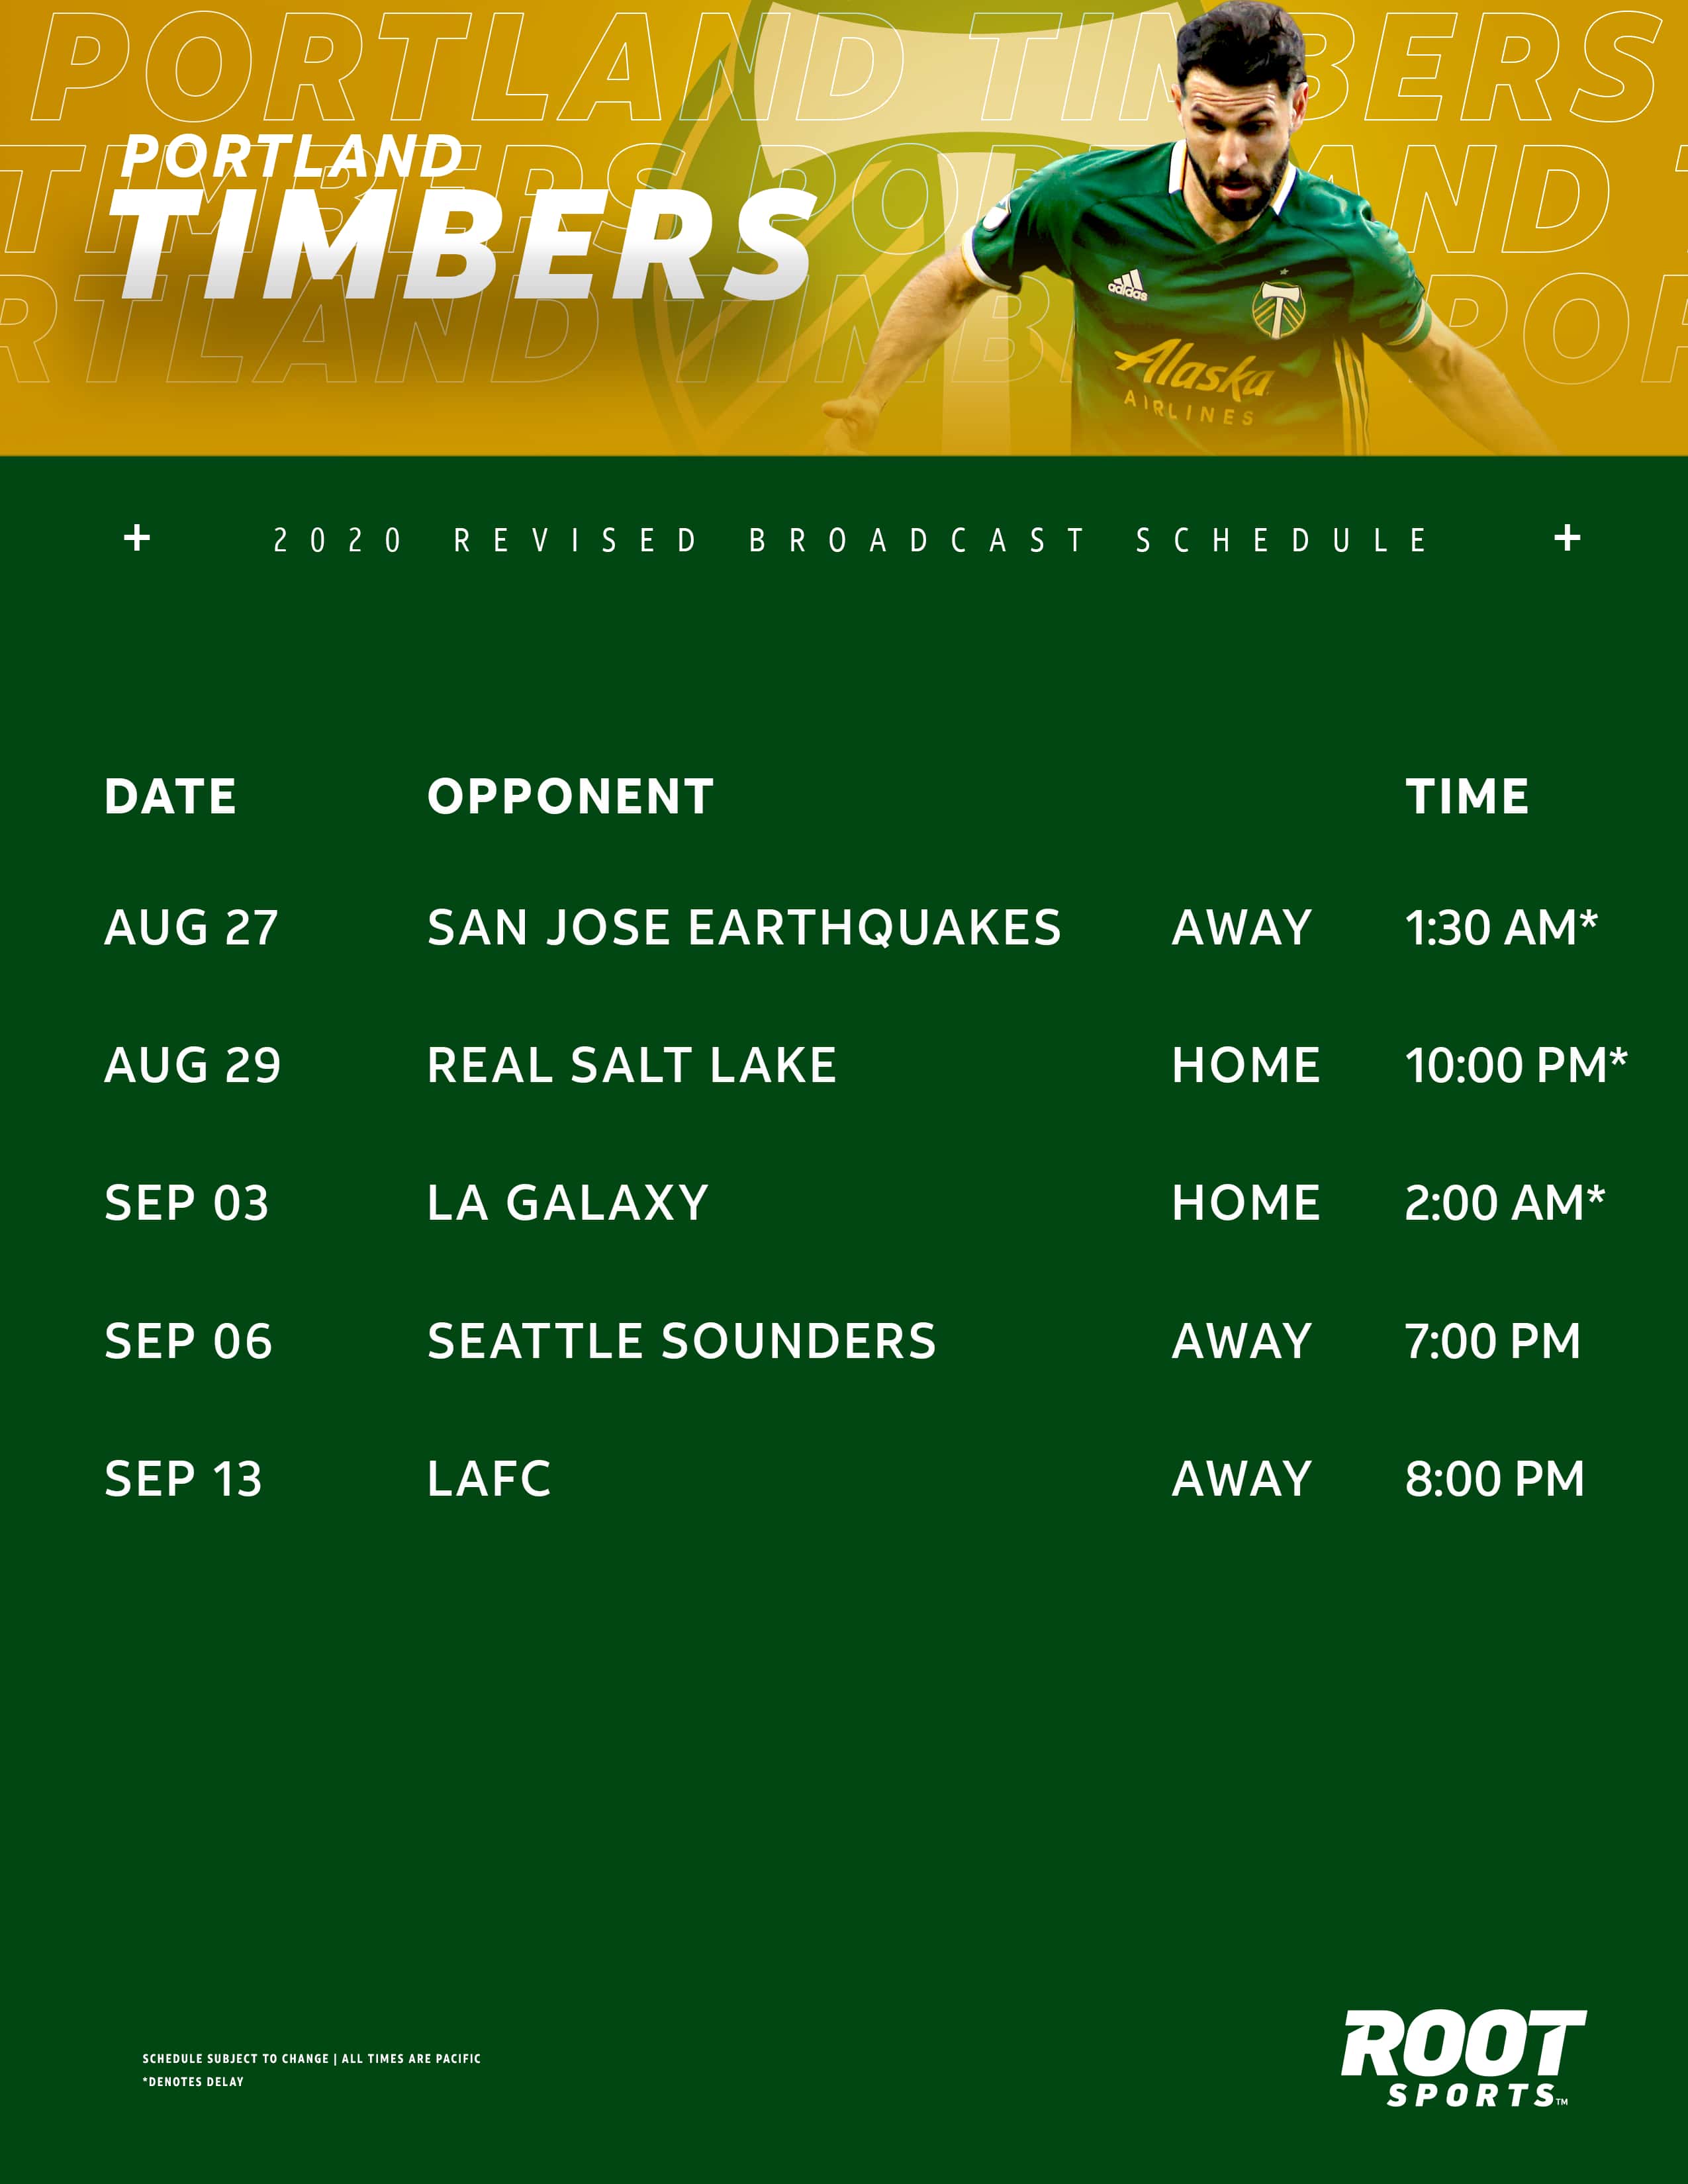 2020_RS_NW_TIMBERS_SCHEDULE_REVISED_SCHEULDE | ROOT SPORTS